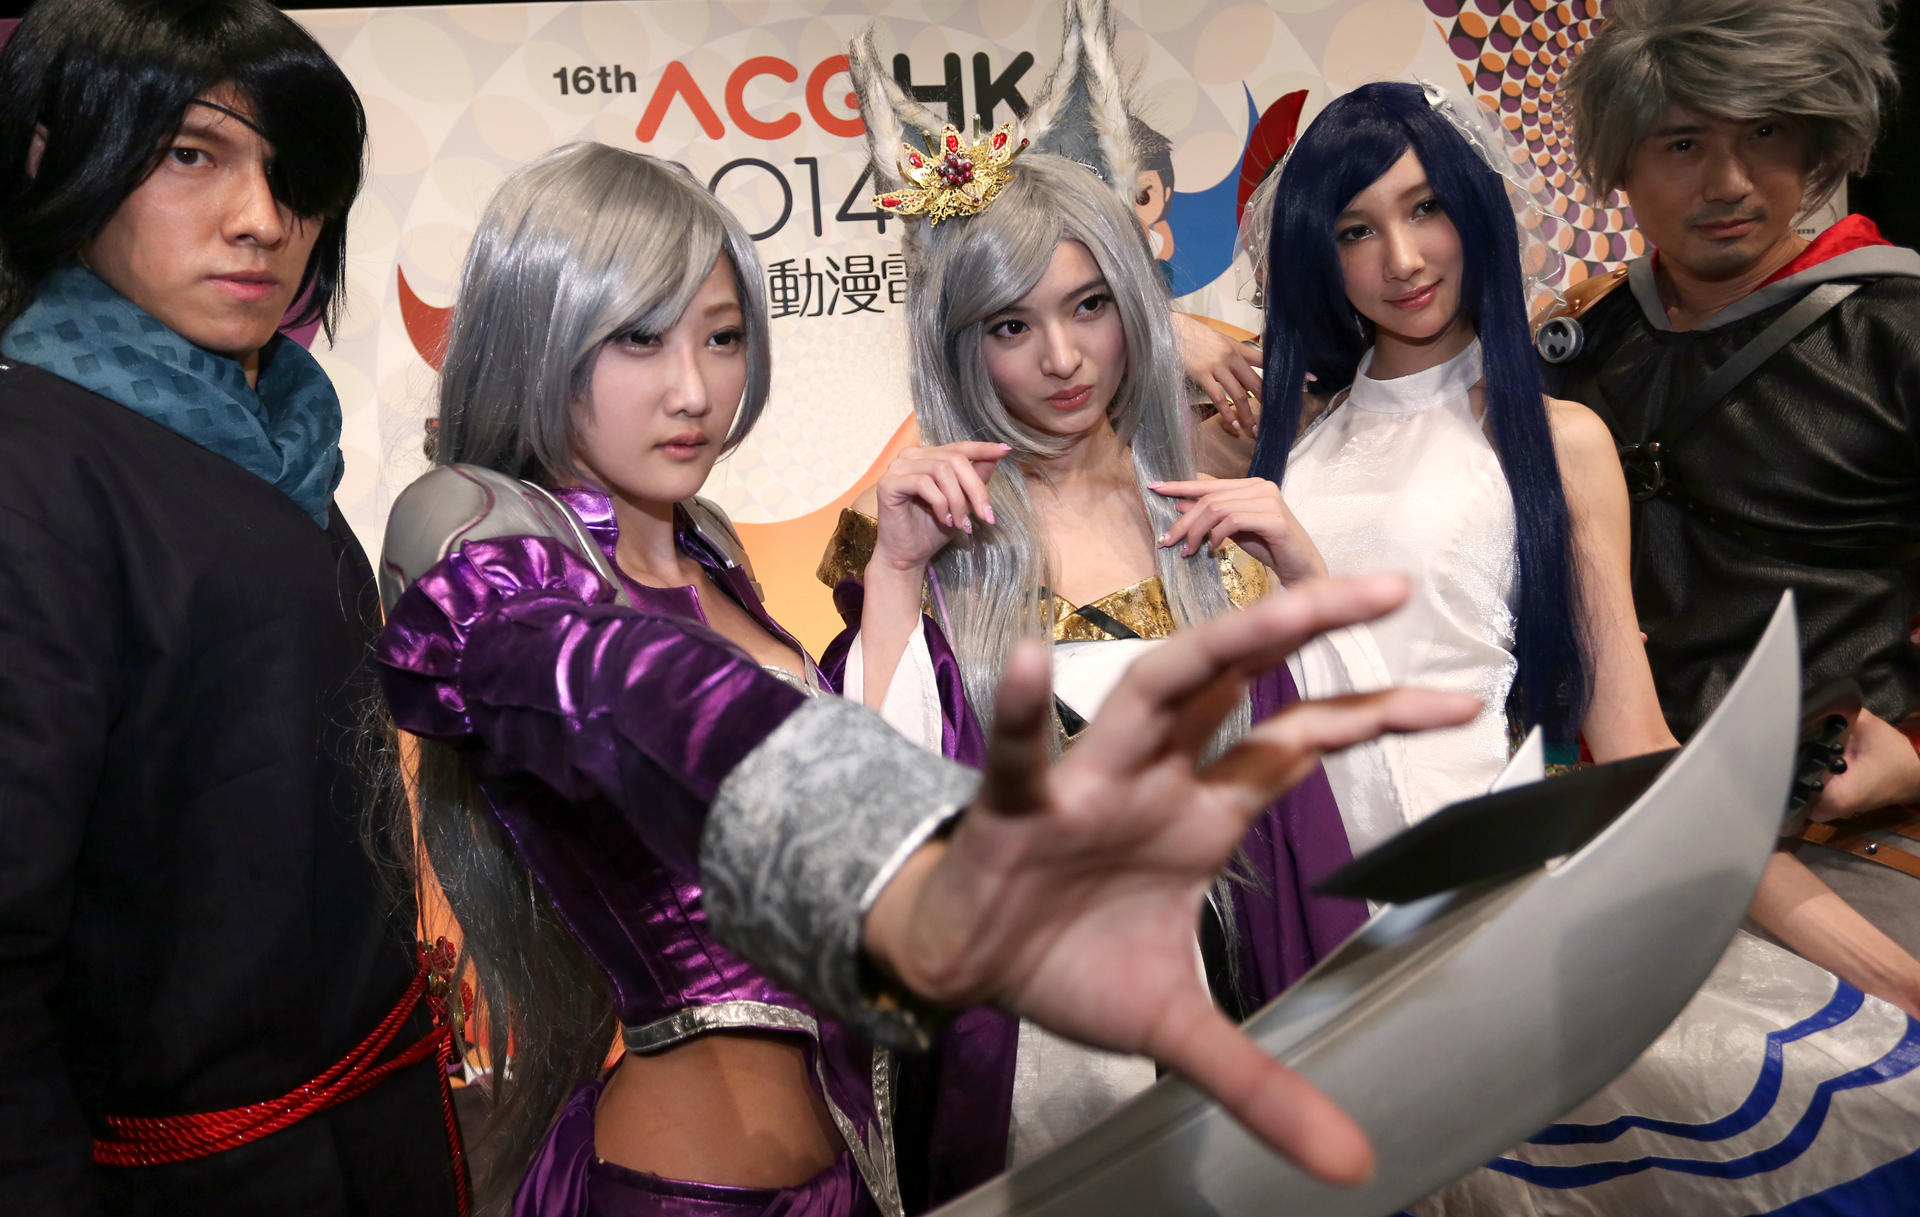 More than 730,000 are expected to attend, many dressed as characters such as these from the gameTower of Saviours. Photo: Nora Tam